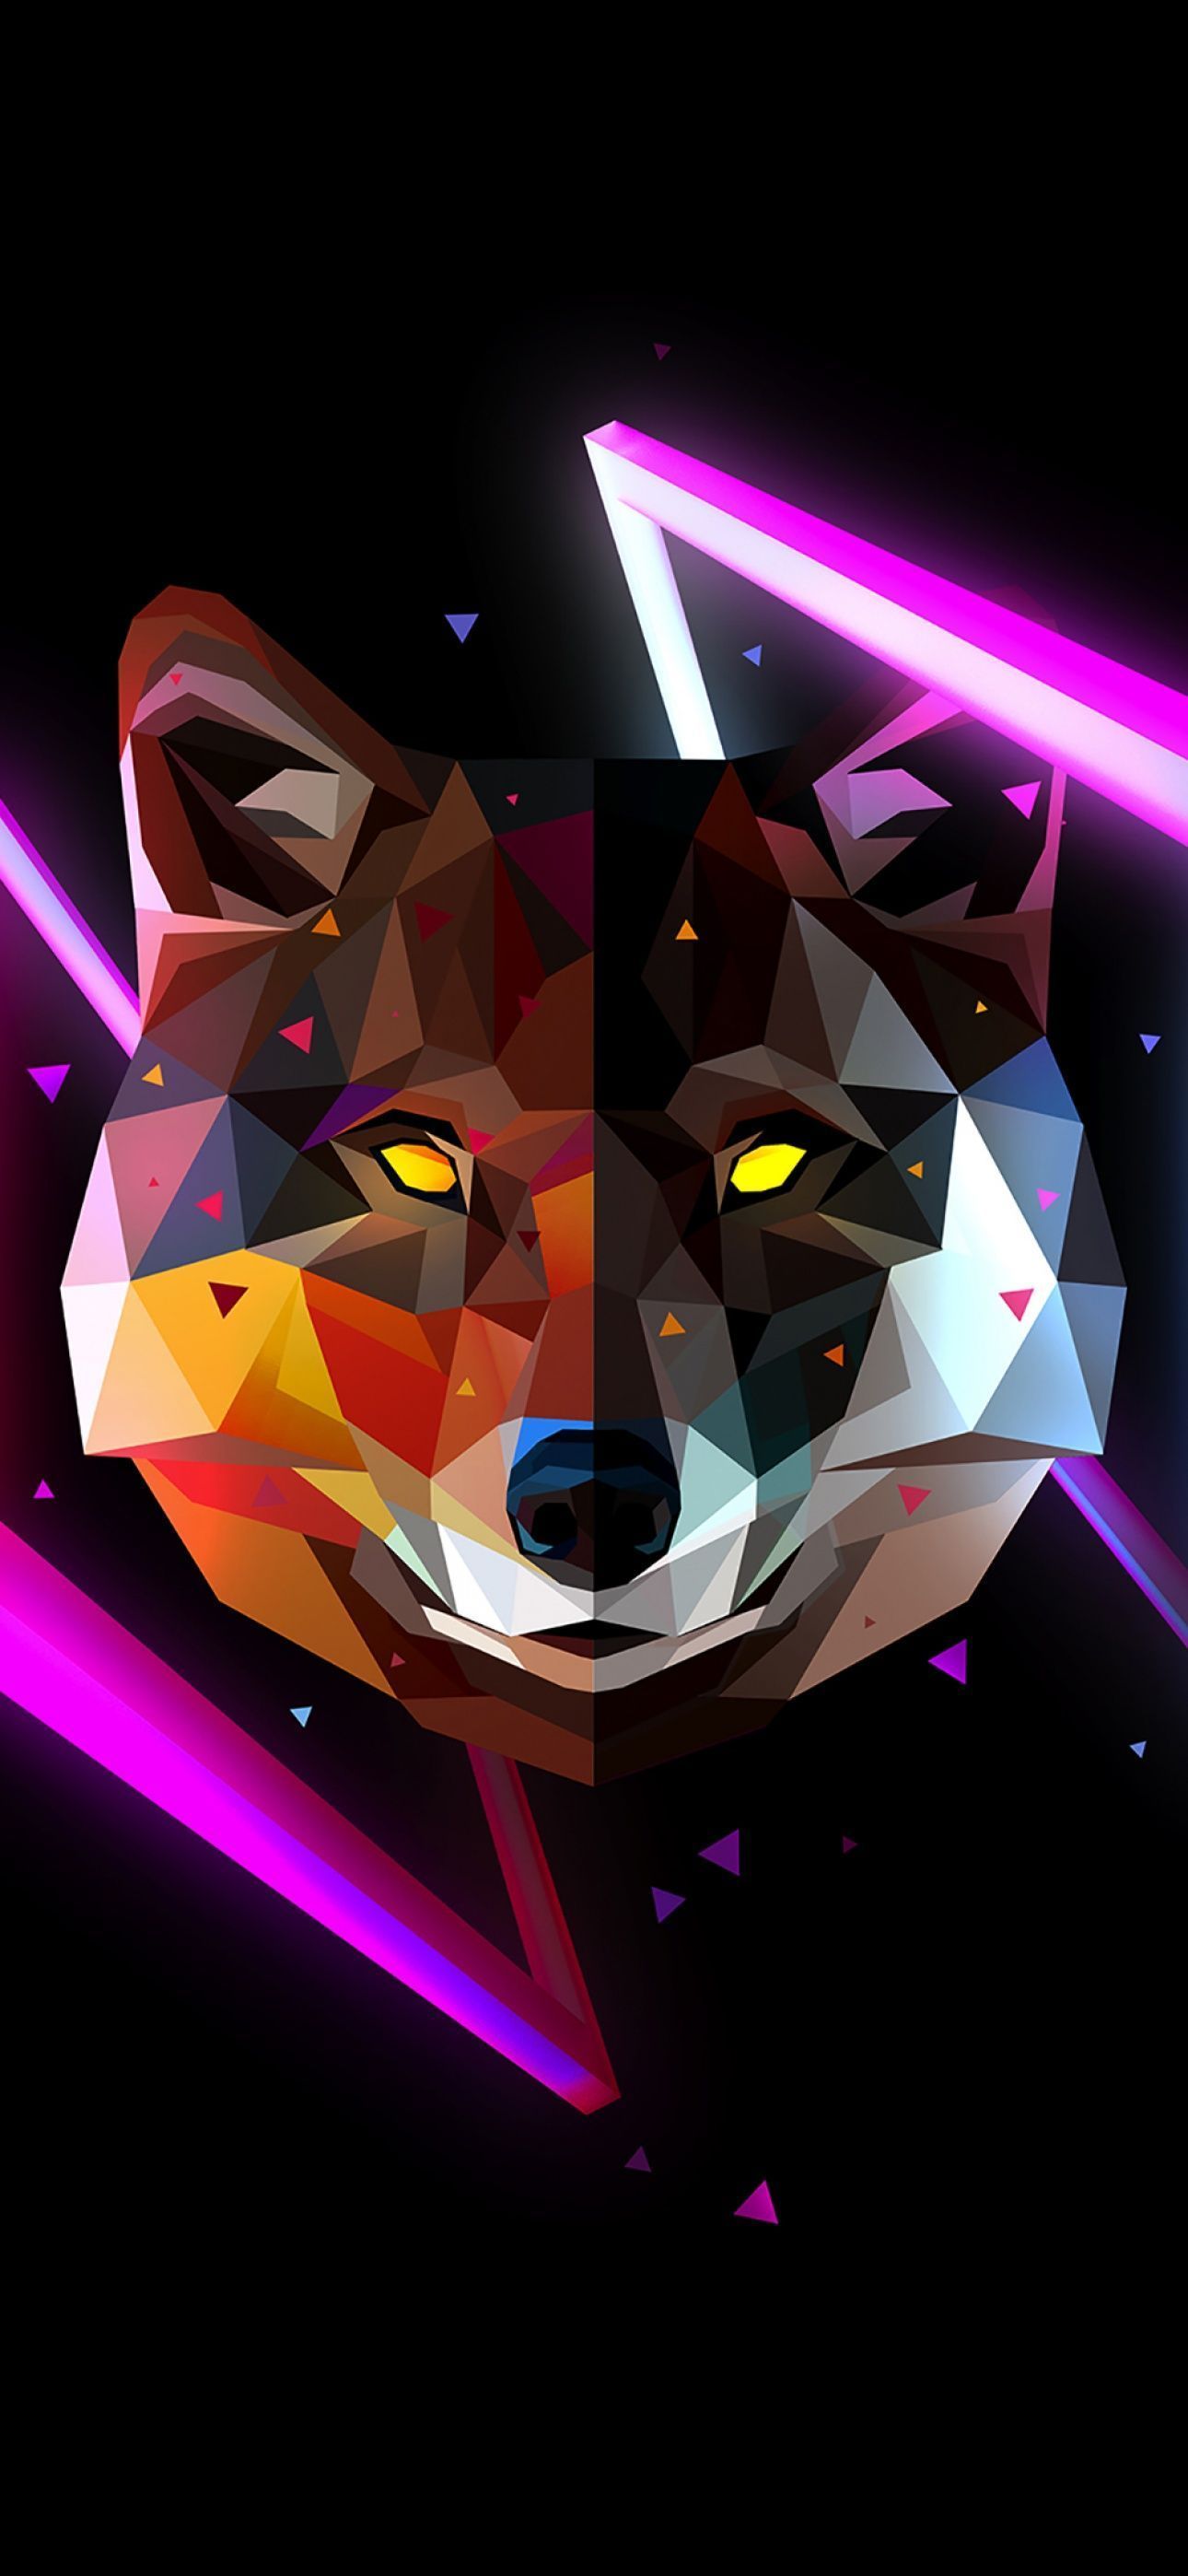 Geometric wolf wallpaper for iPhone and Android. - Wolf, low poly